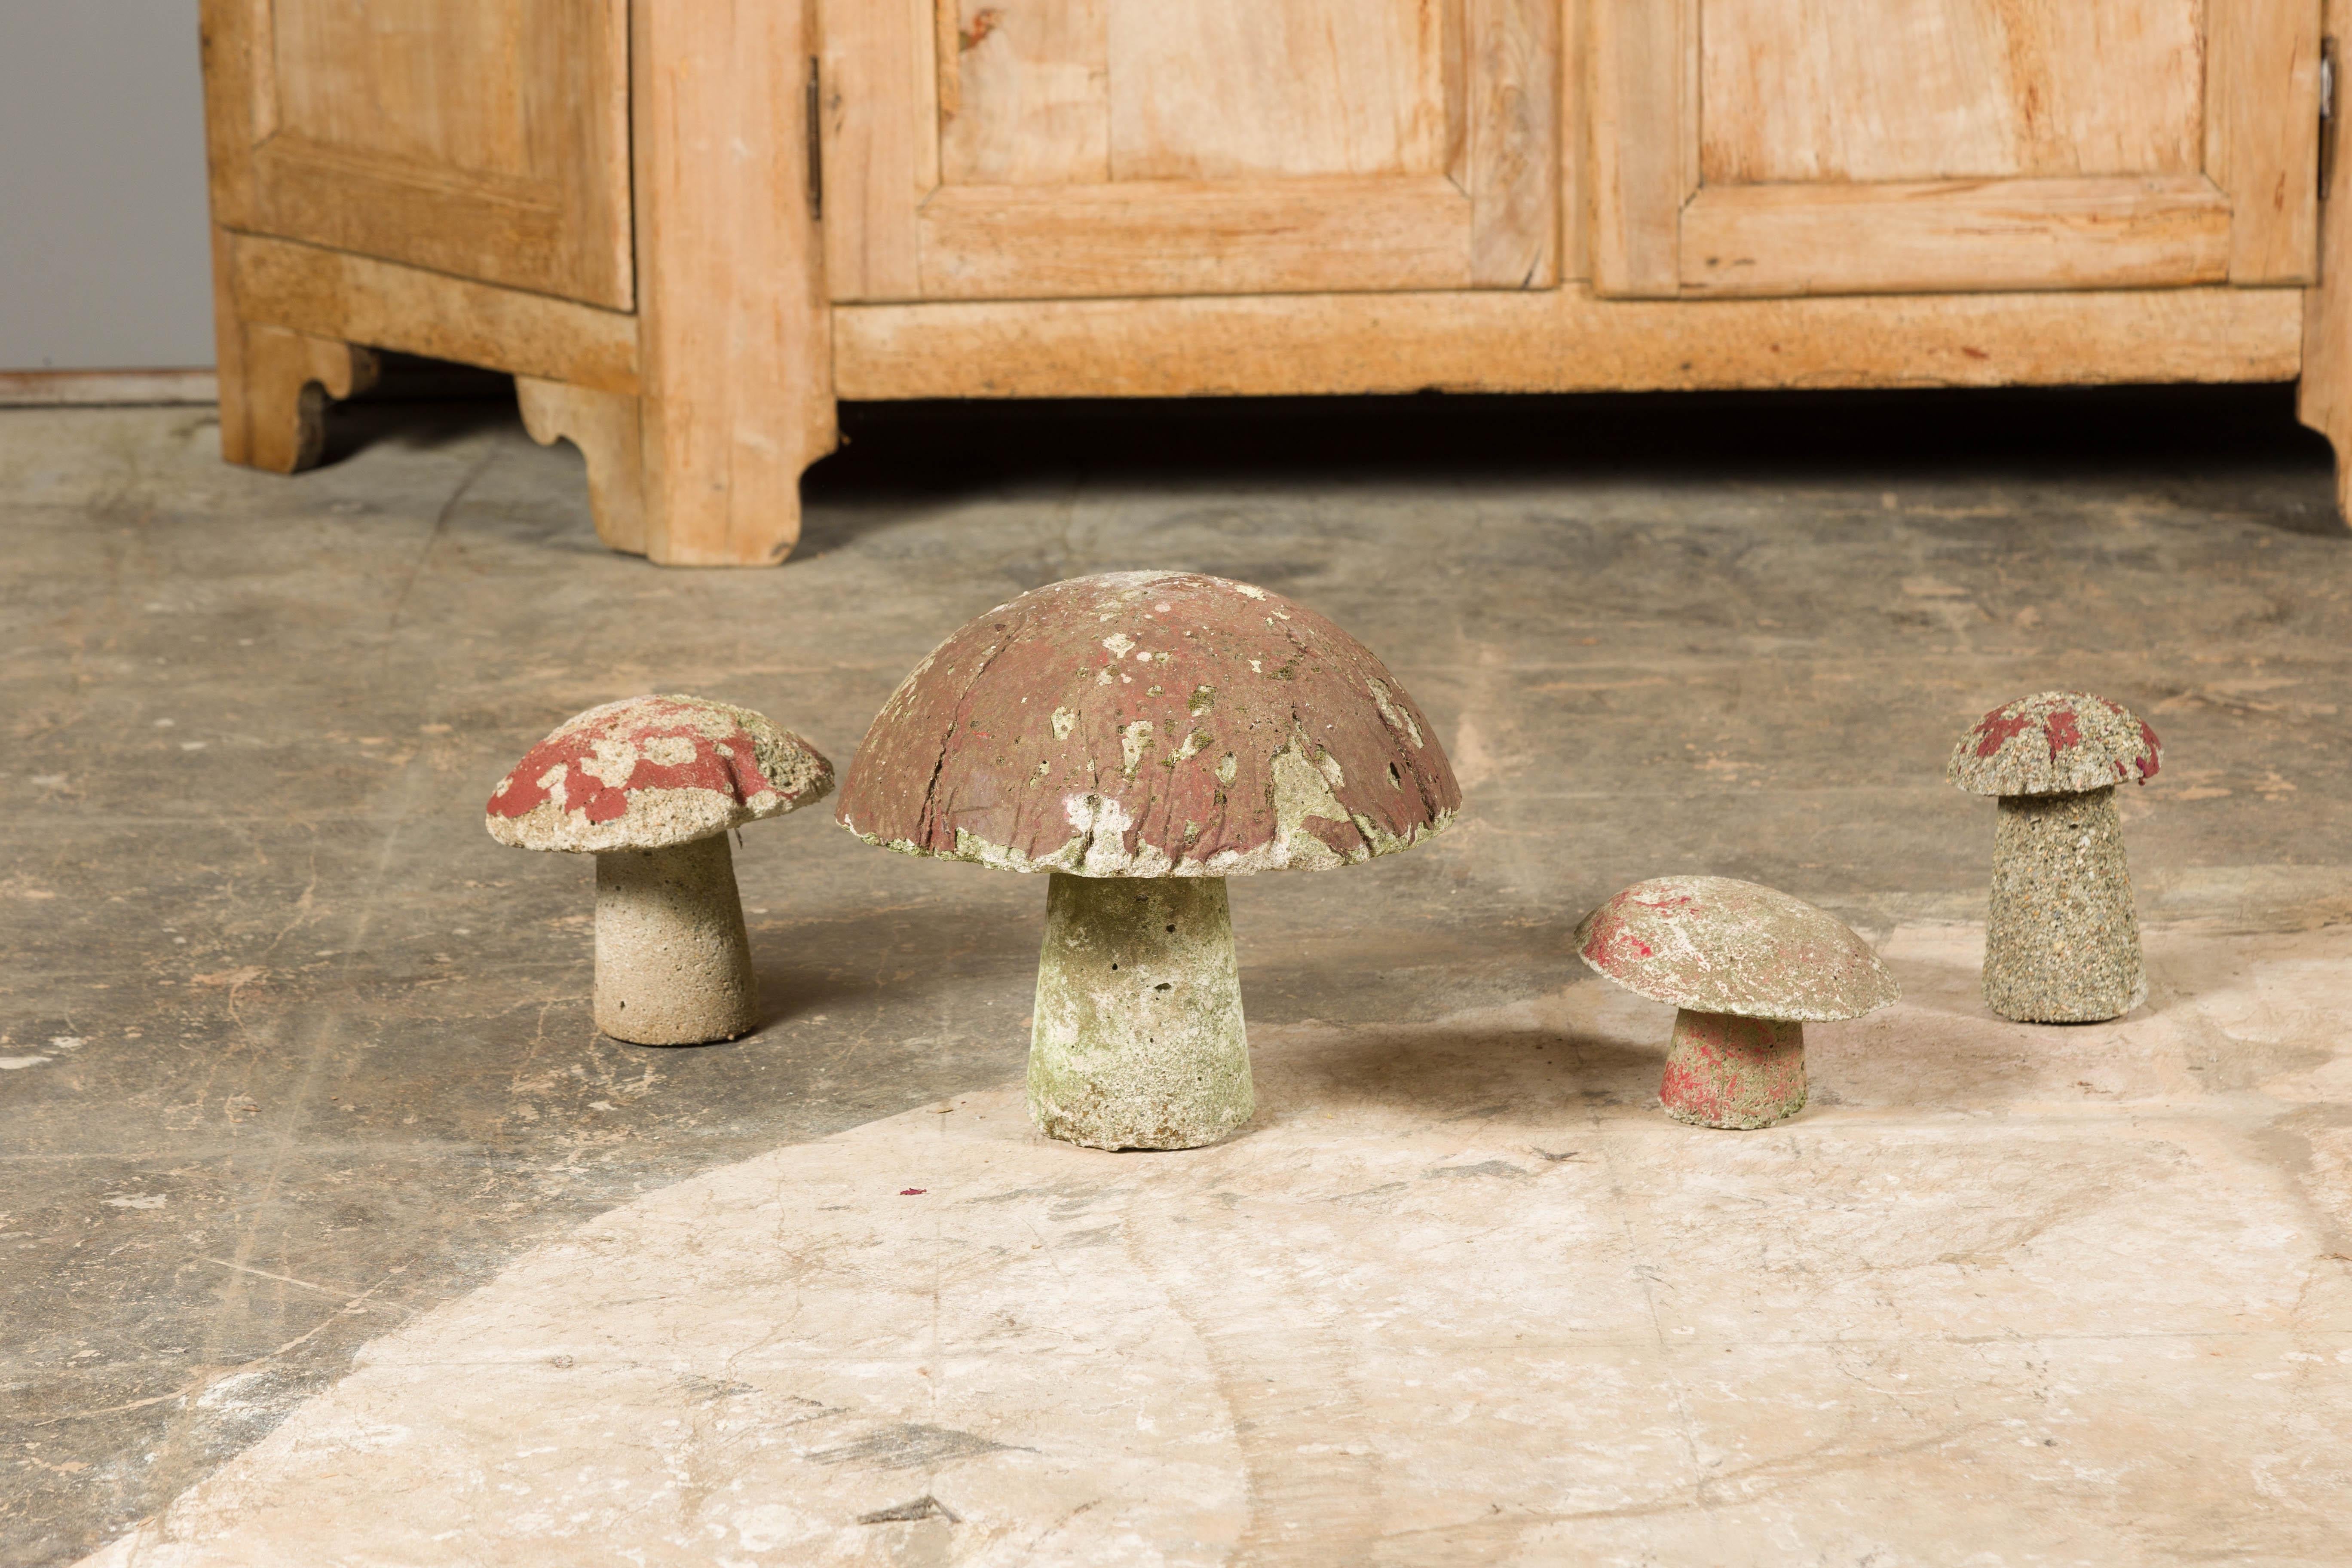 Set of Four American Midcentury Painted Concrete Mushroom Garden Ornaments In Good Condition For Sale In Atlanta, GA